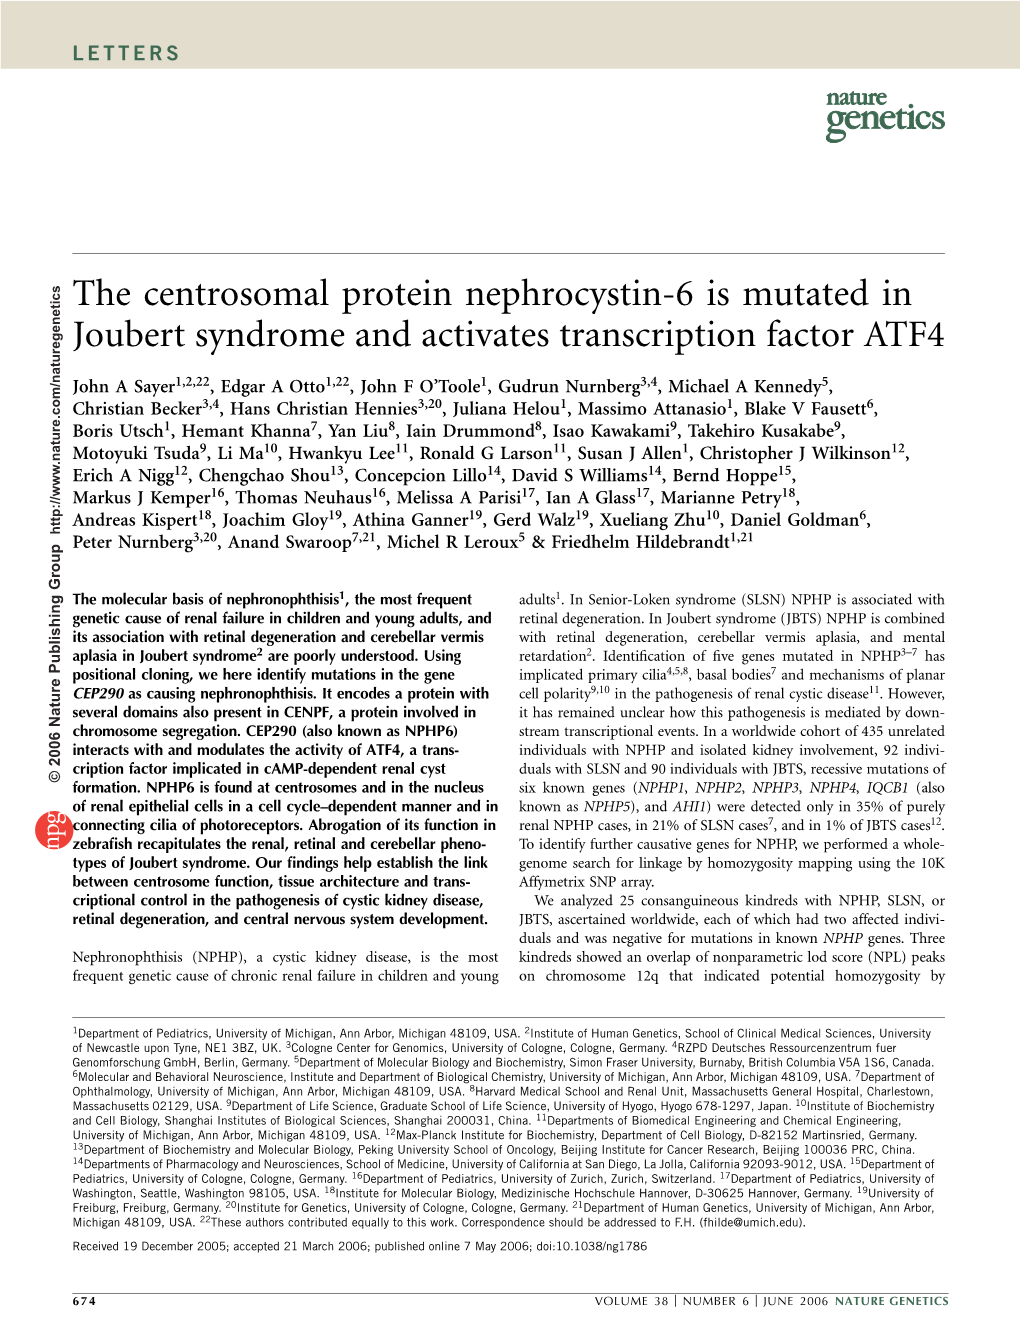 The Centrosomal Protein Nephrocystin-6 Is Mutated in Joubert Syndrome and Activates Transcription Factor ATF4